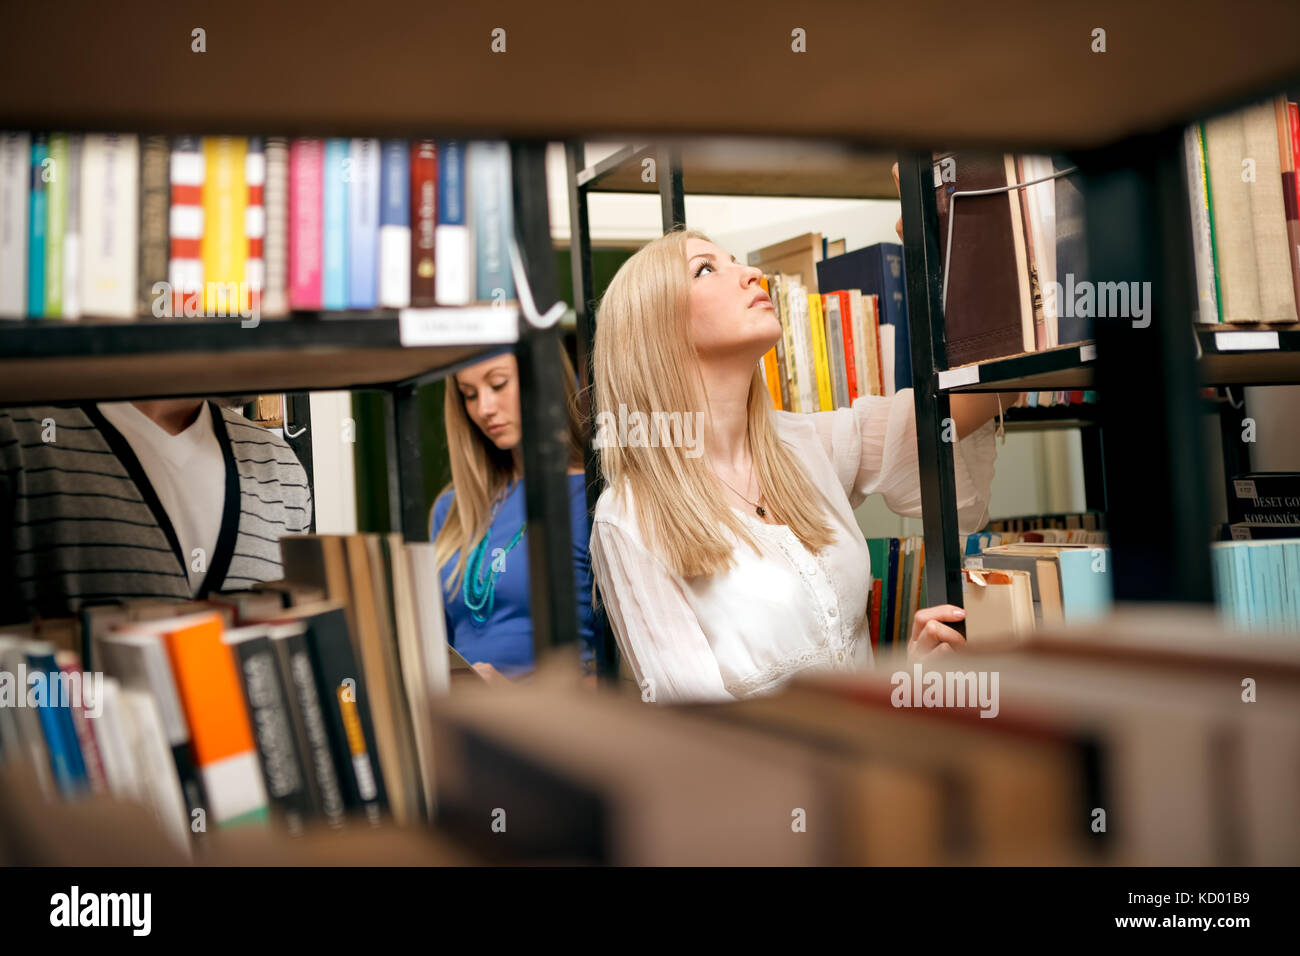 female student getting books in a library Stock Photo